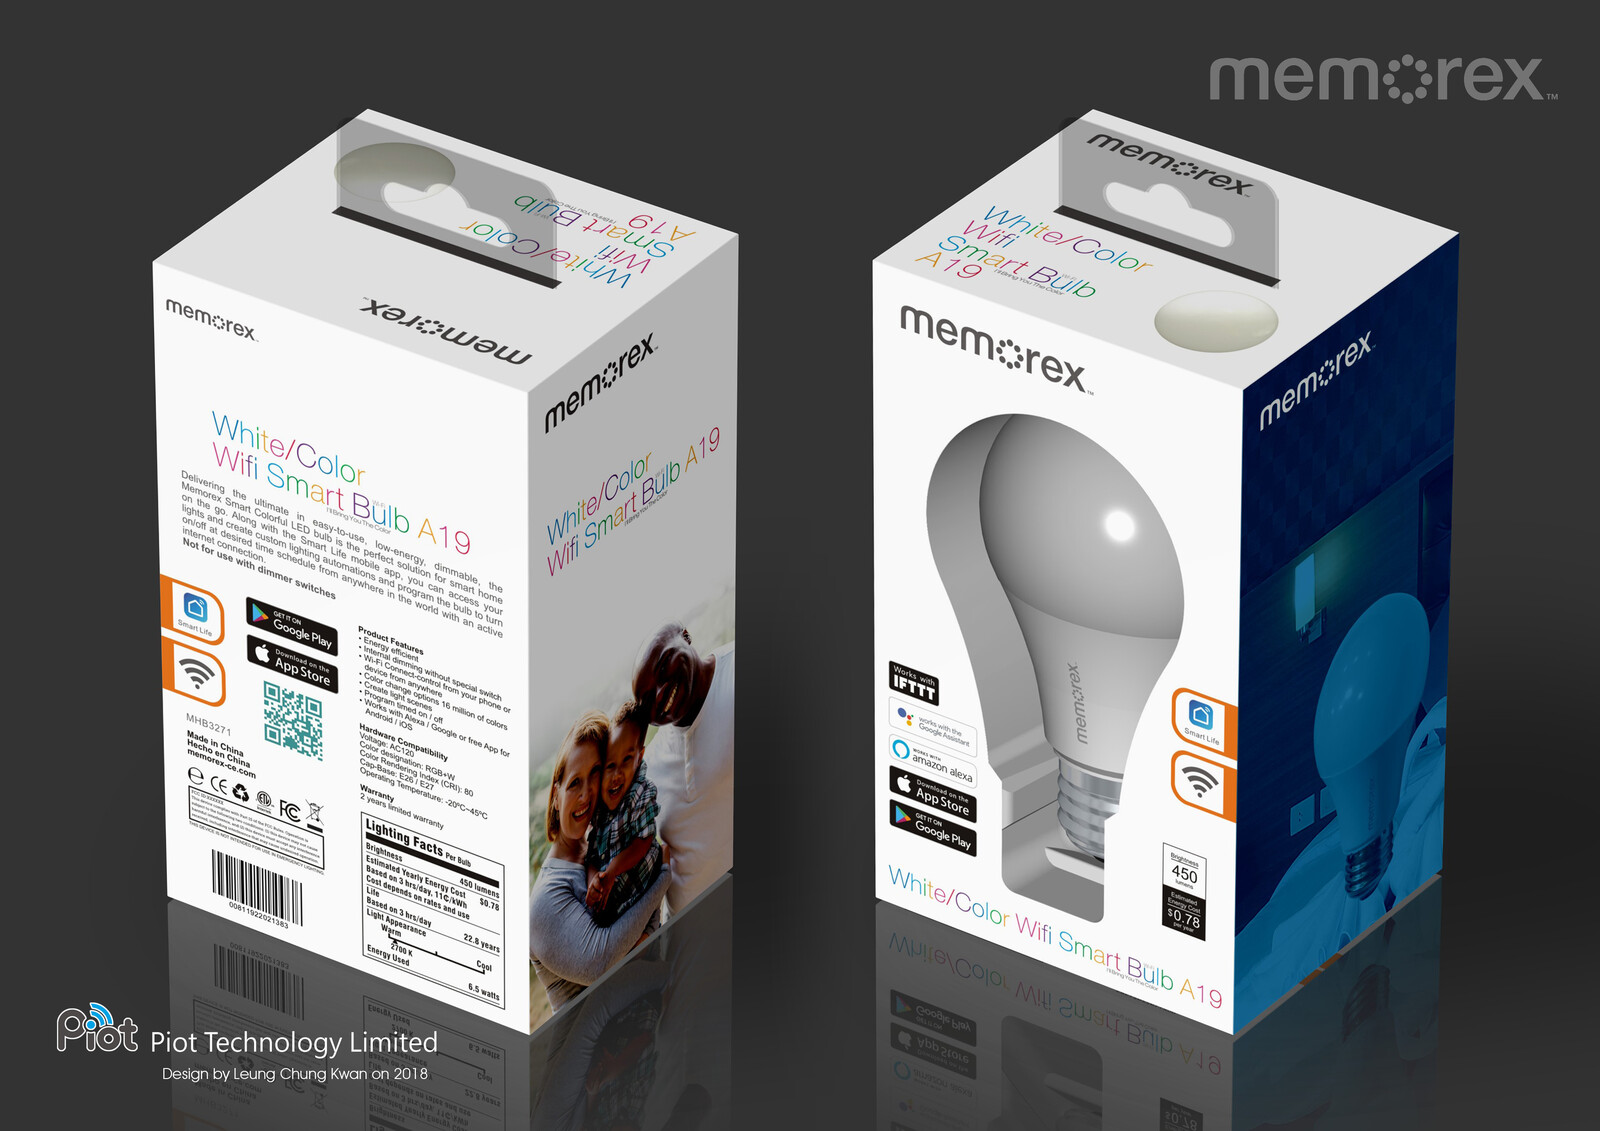 💎 Color Gift Box | Design by Leung Chung Kwan on 2018 💎
Brand Name︰memorex | Client︰Piot Technology Limited
Graphic Design Specification︰http://bit.ly/pi097-v4-1